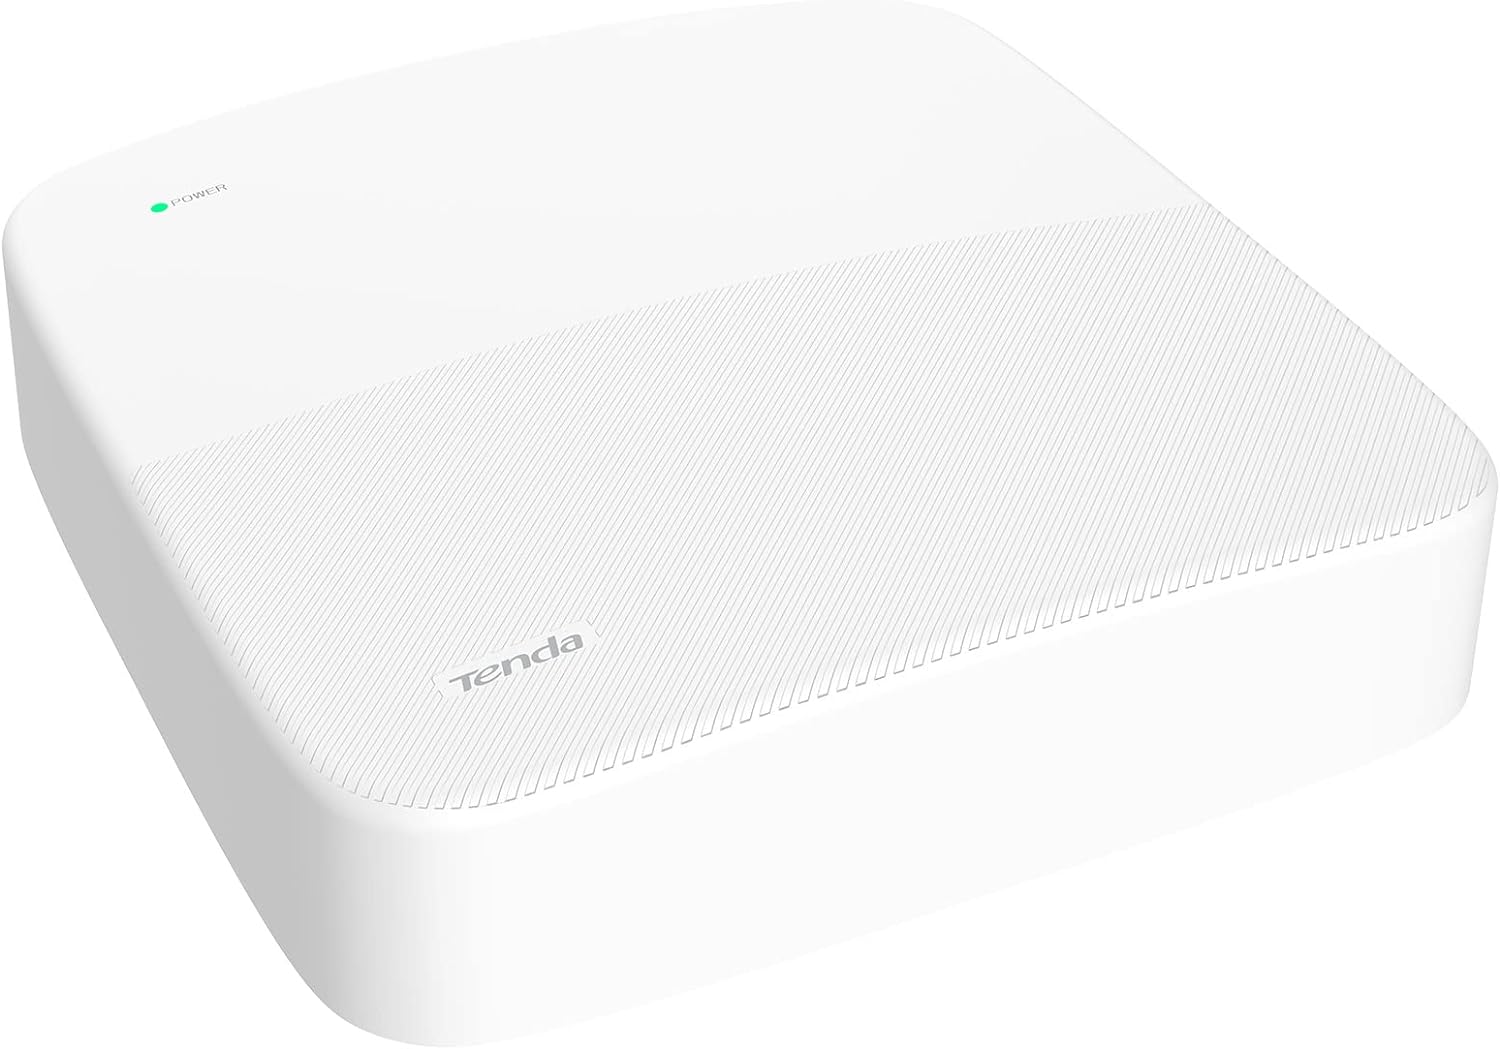 Tenda NVR N3L-4H 4K 4CH Network Video Recorder for Home Security Camera System, 1080p/3MP/4MP/5MP/8MP ONVIF NVR Recorders, H.265 Surveillance Video Recorders, Supports up to 10TB HDD (Not Included)